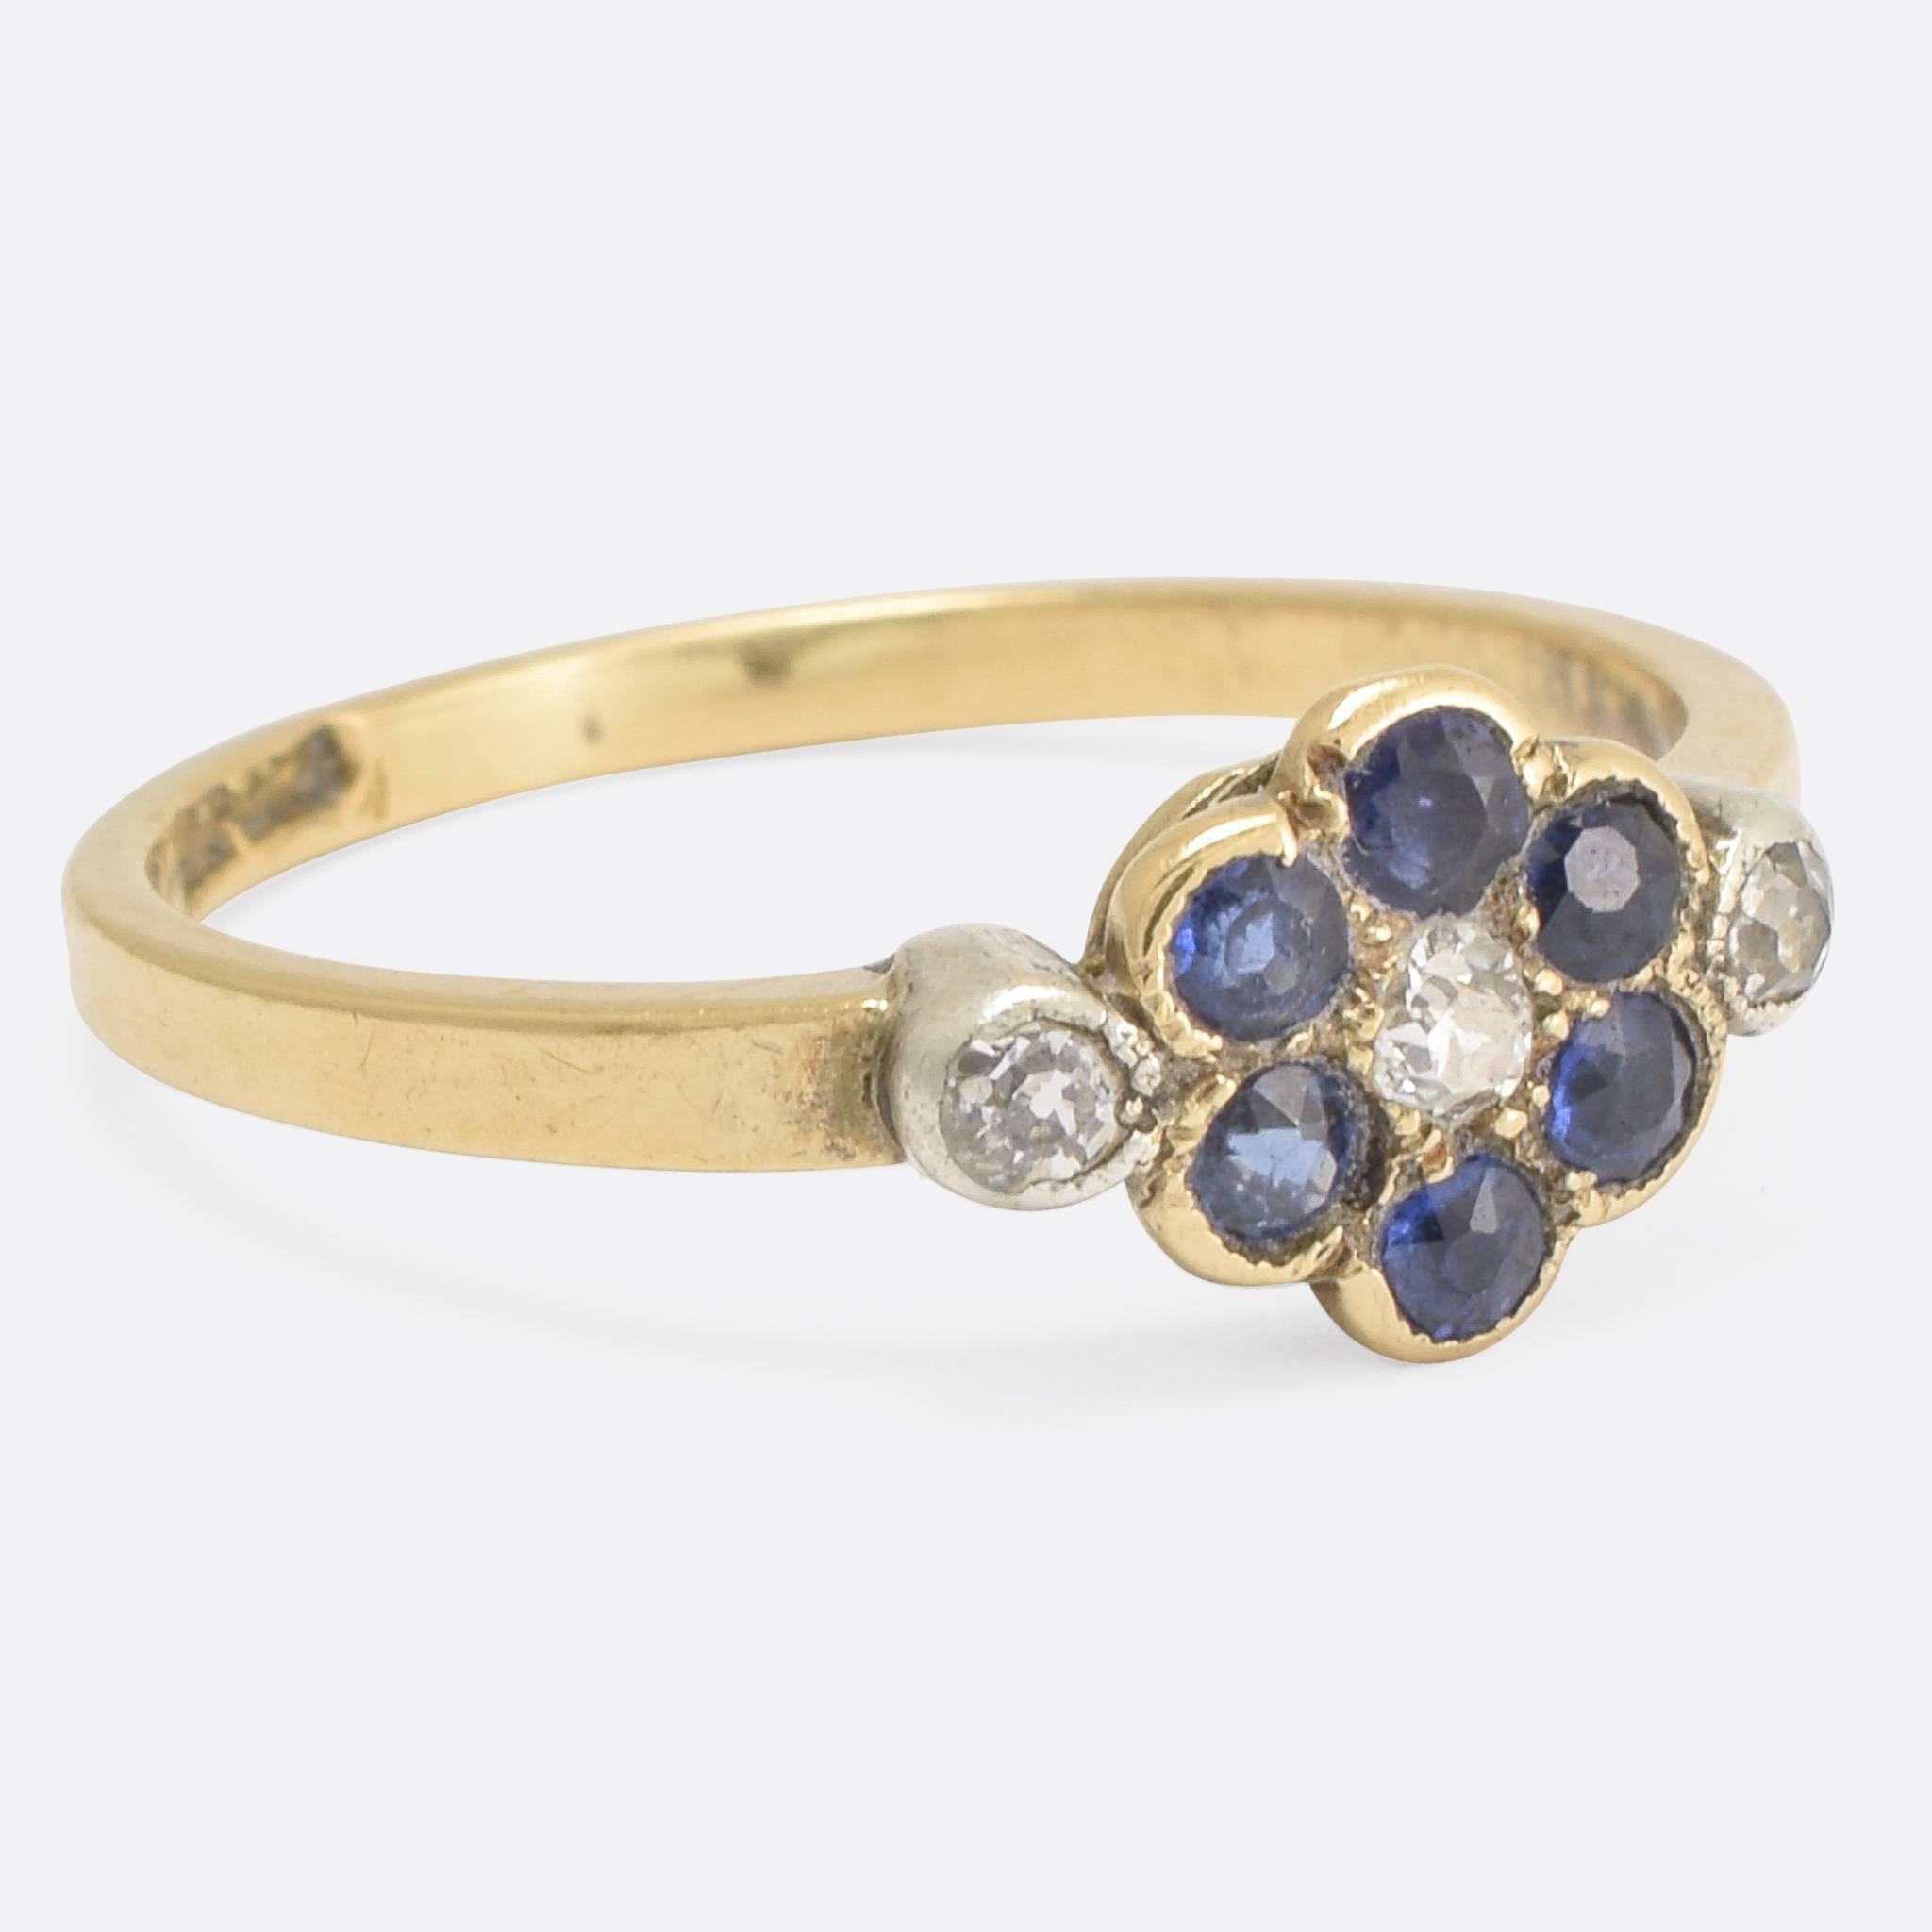 An adorable antique sapphire and diamond cluster ring, modelled in 18k gold and platinum. It dates to the Edwardian era, c.1910 - with the head modelled as a daisy (or similar flower). A wonderful combination of stones: vibrant blue sapphires and